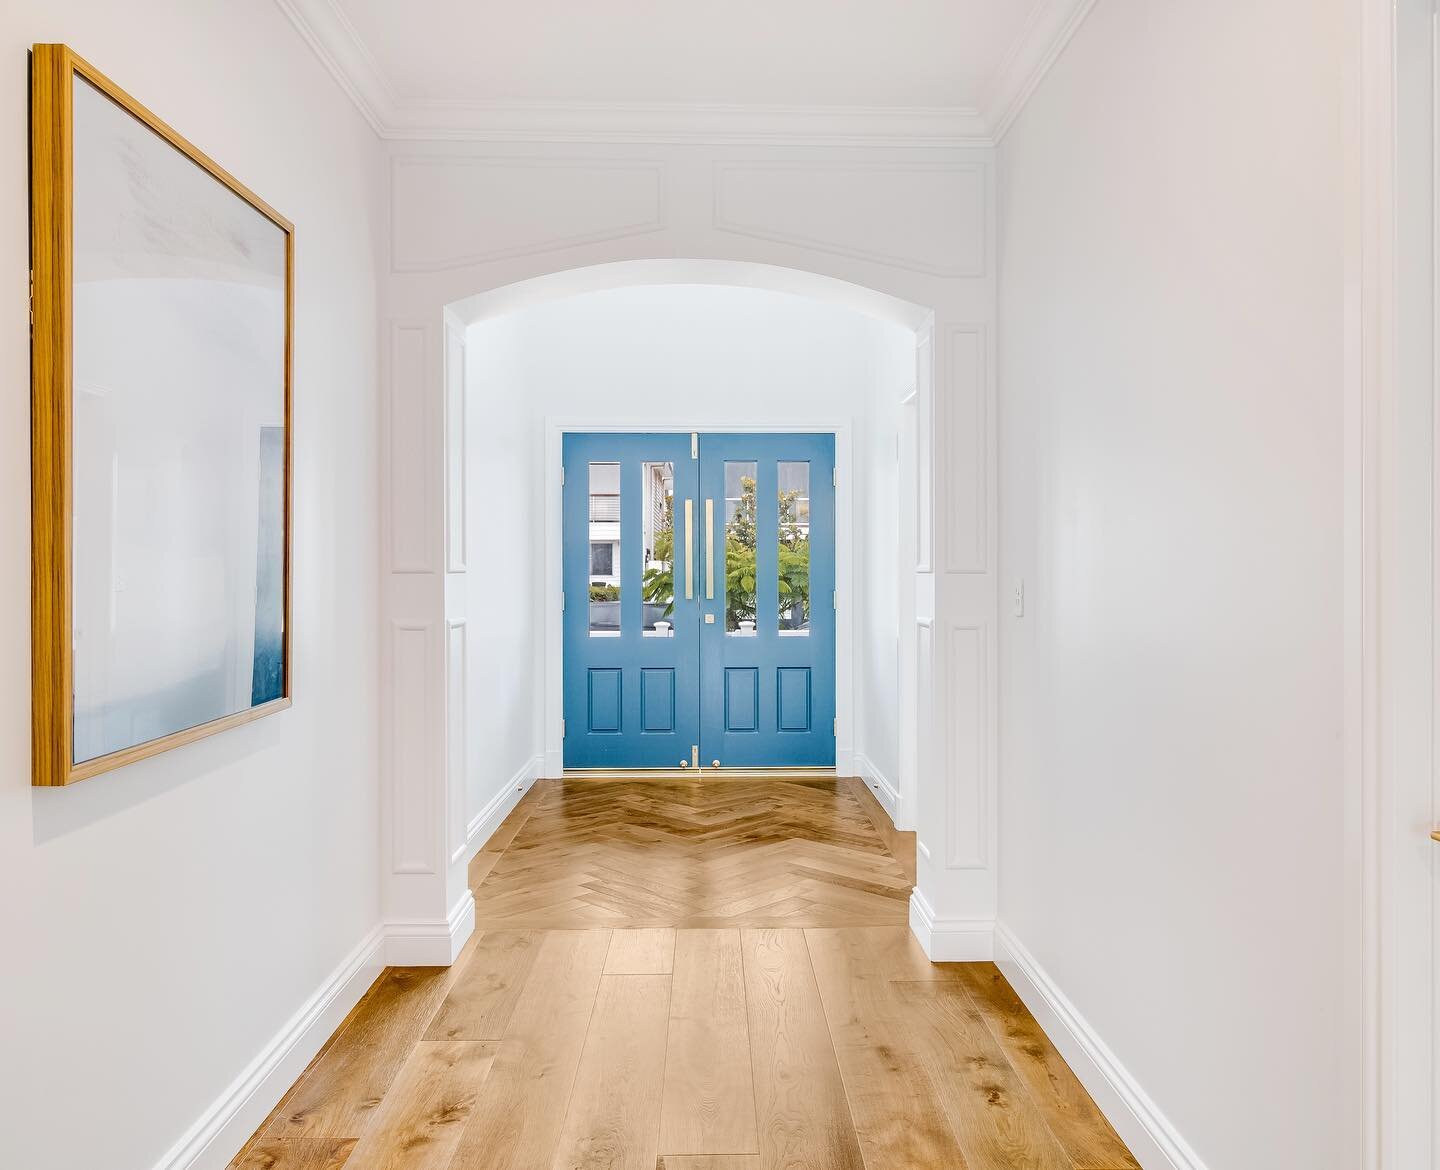 We love a grand entry at Pillah, featured is the entryway at our &lsquo;Stuart&rsquo; project, with beautiful herringbone flooring and a wainscoted arch 😍